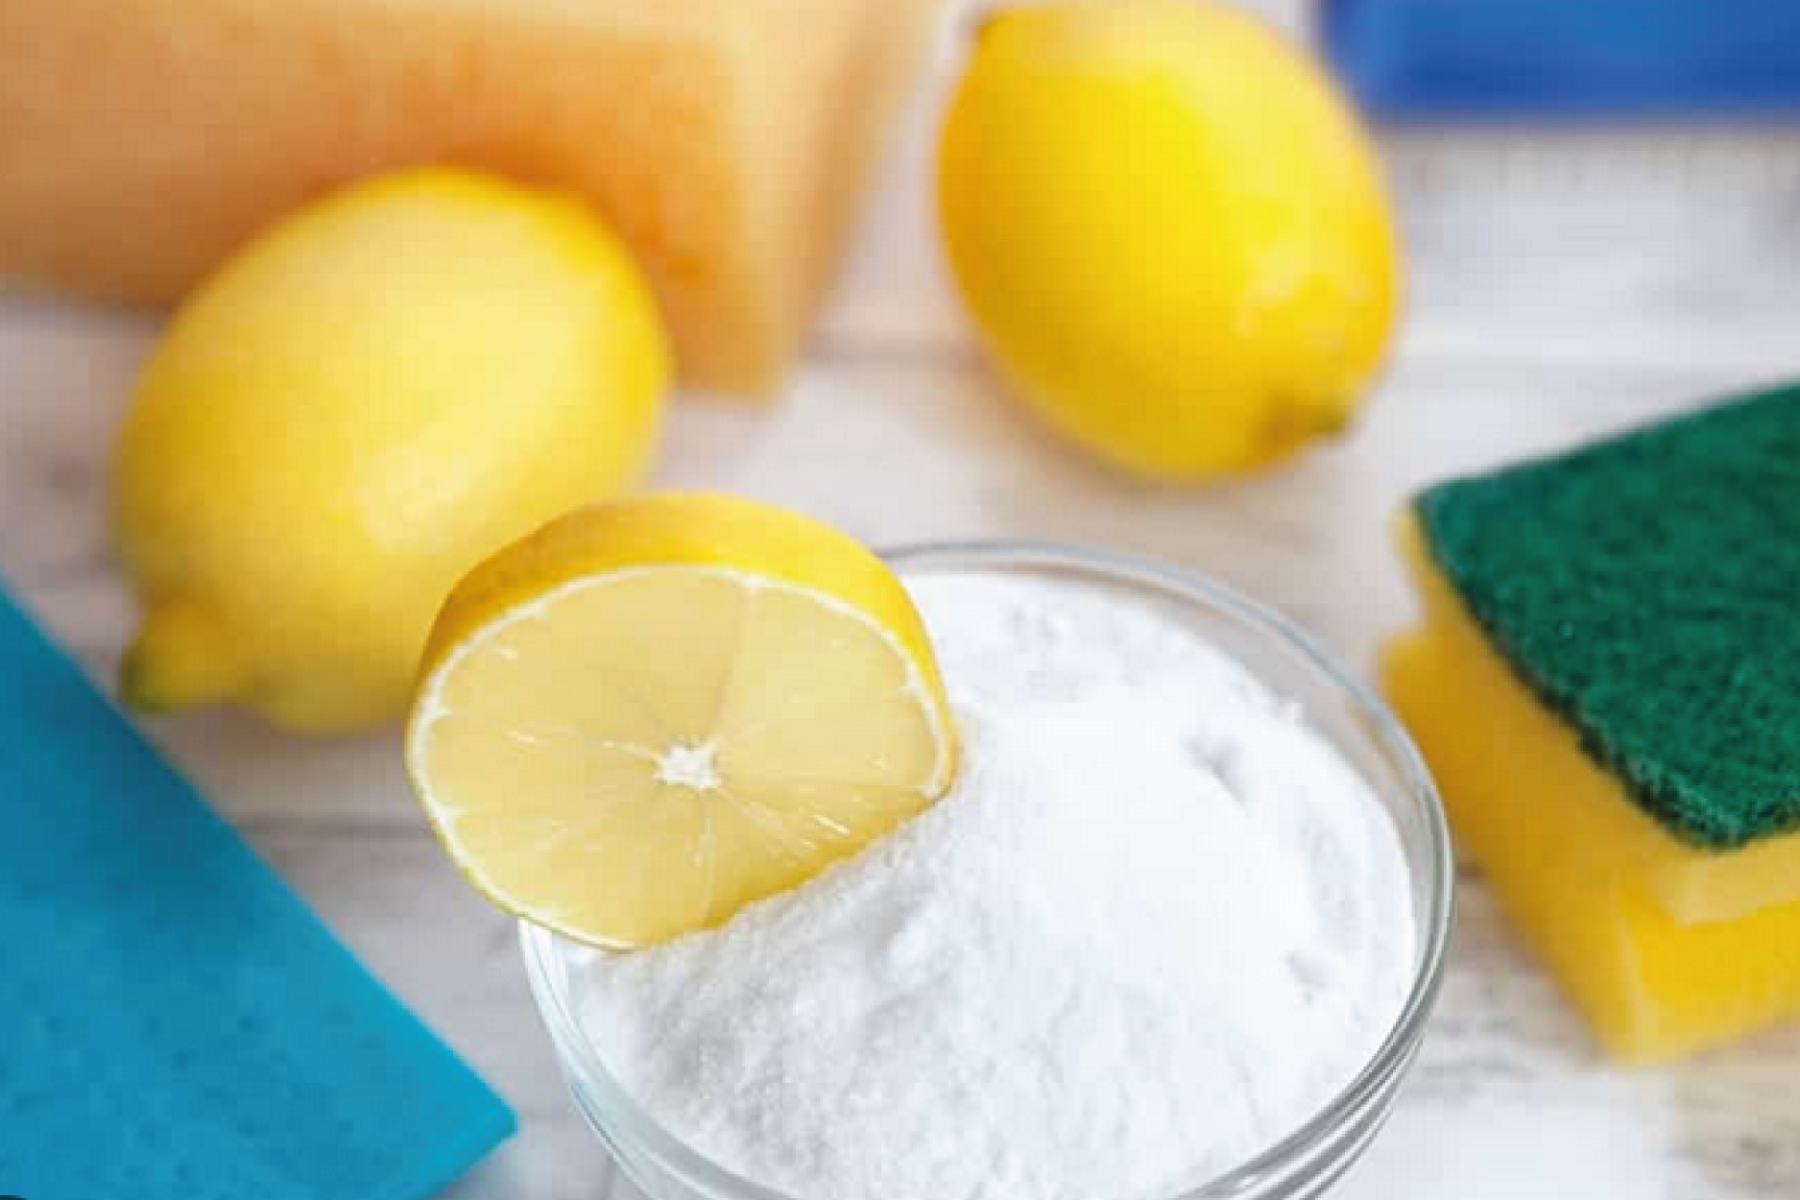 Baking Soda And Lemon For Cleaning Taps